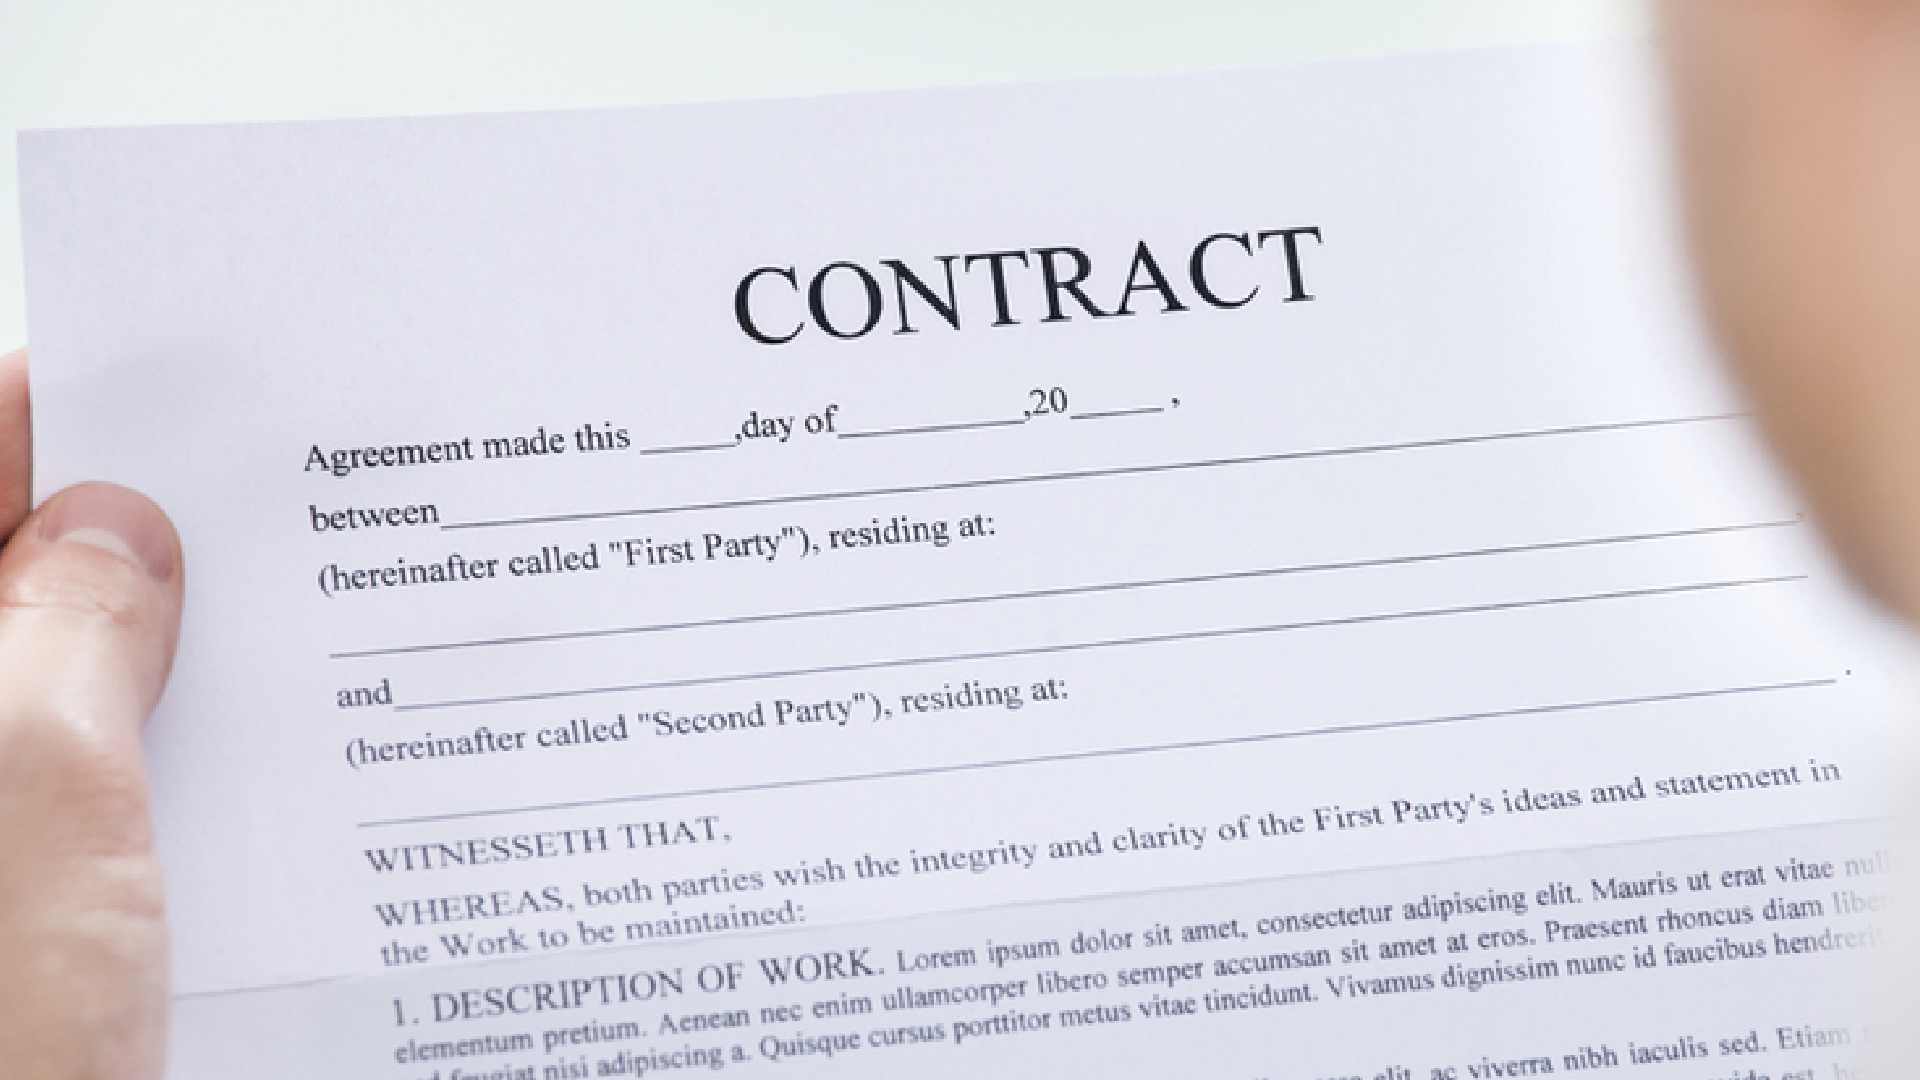 how to download labour contract